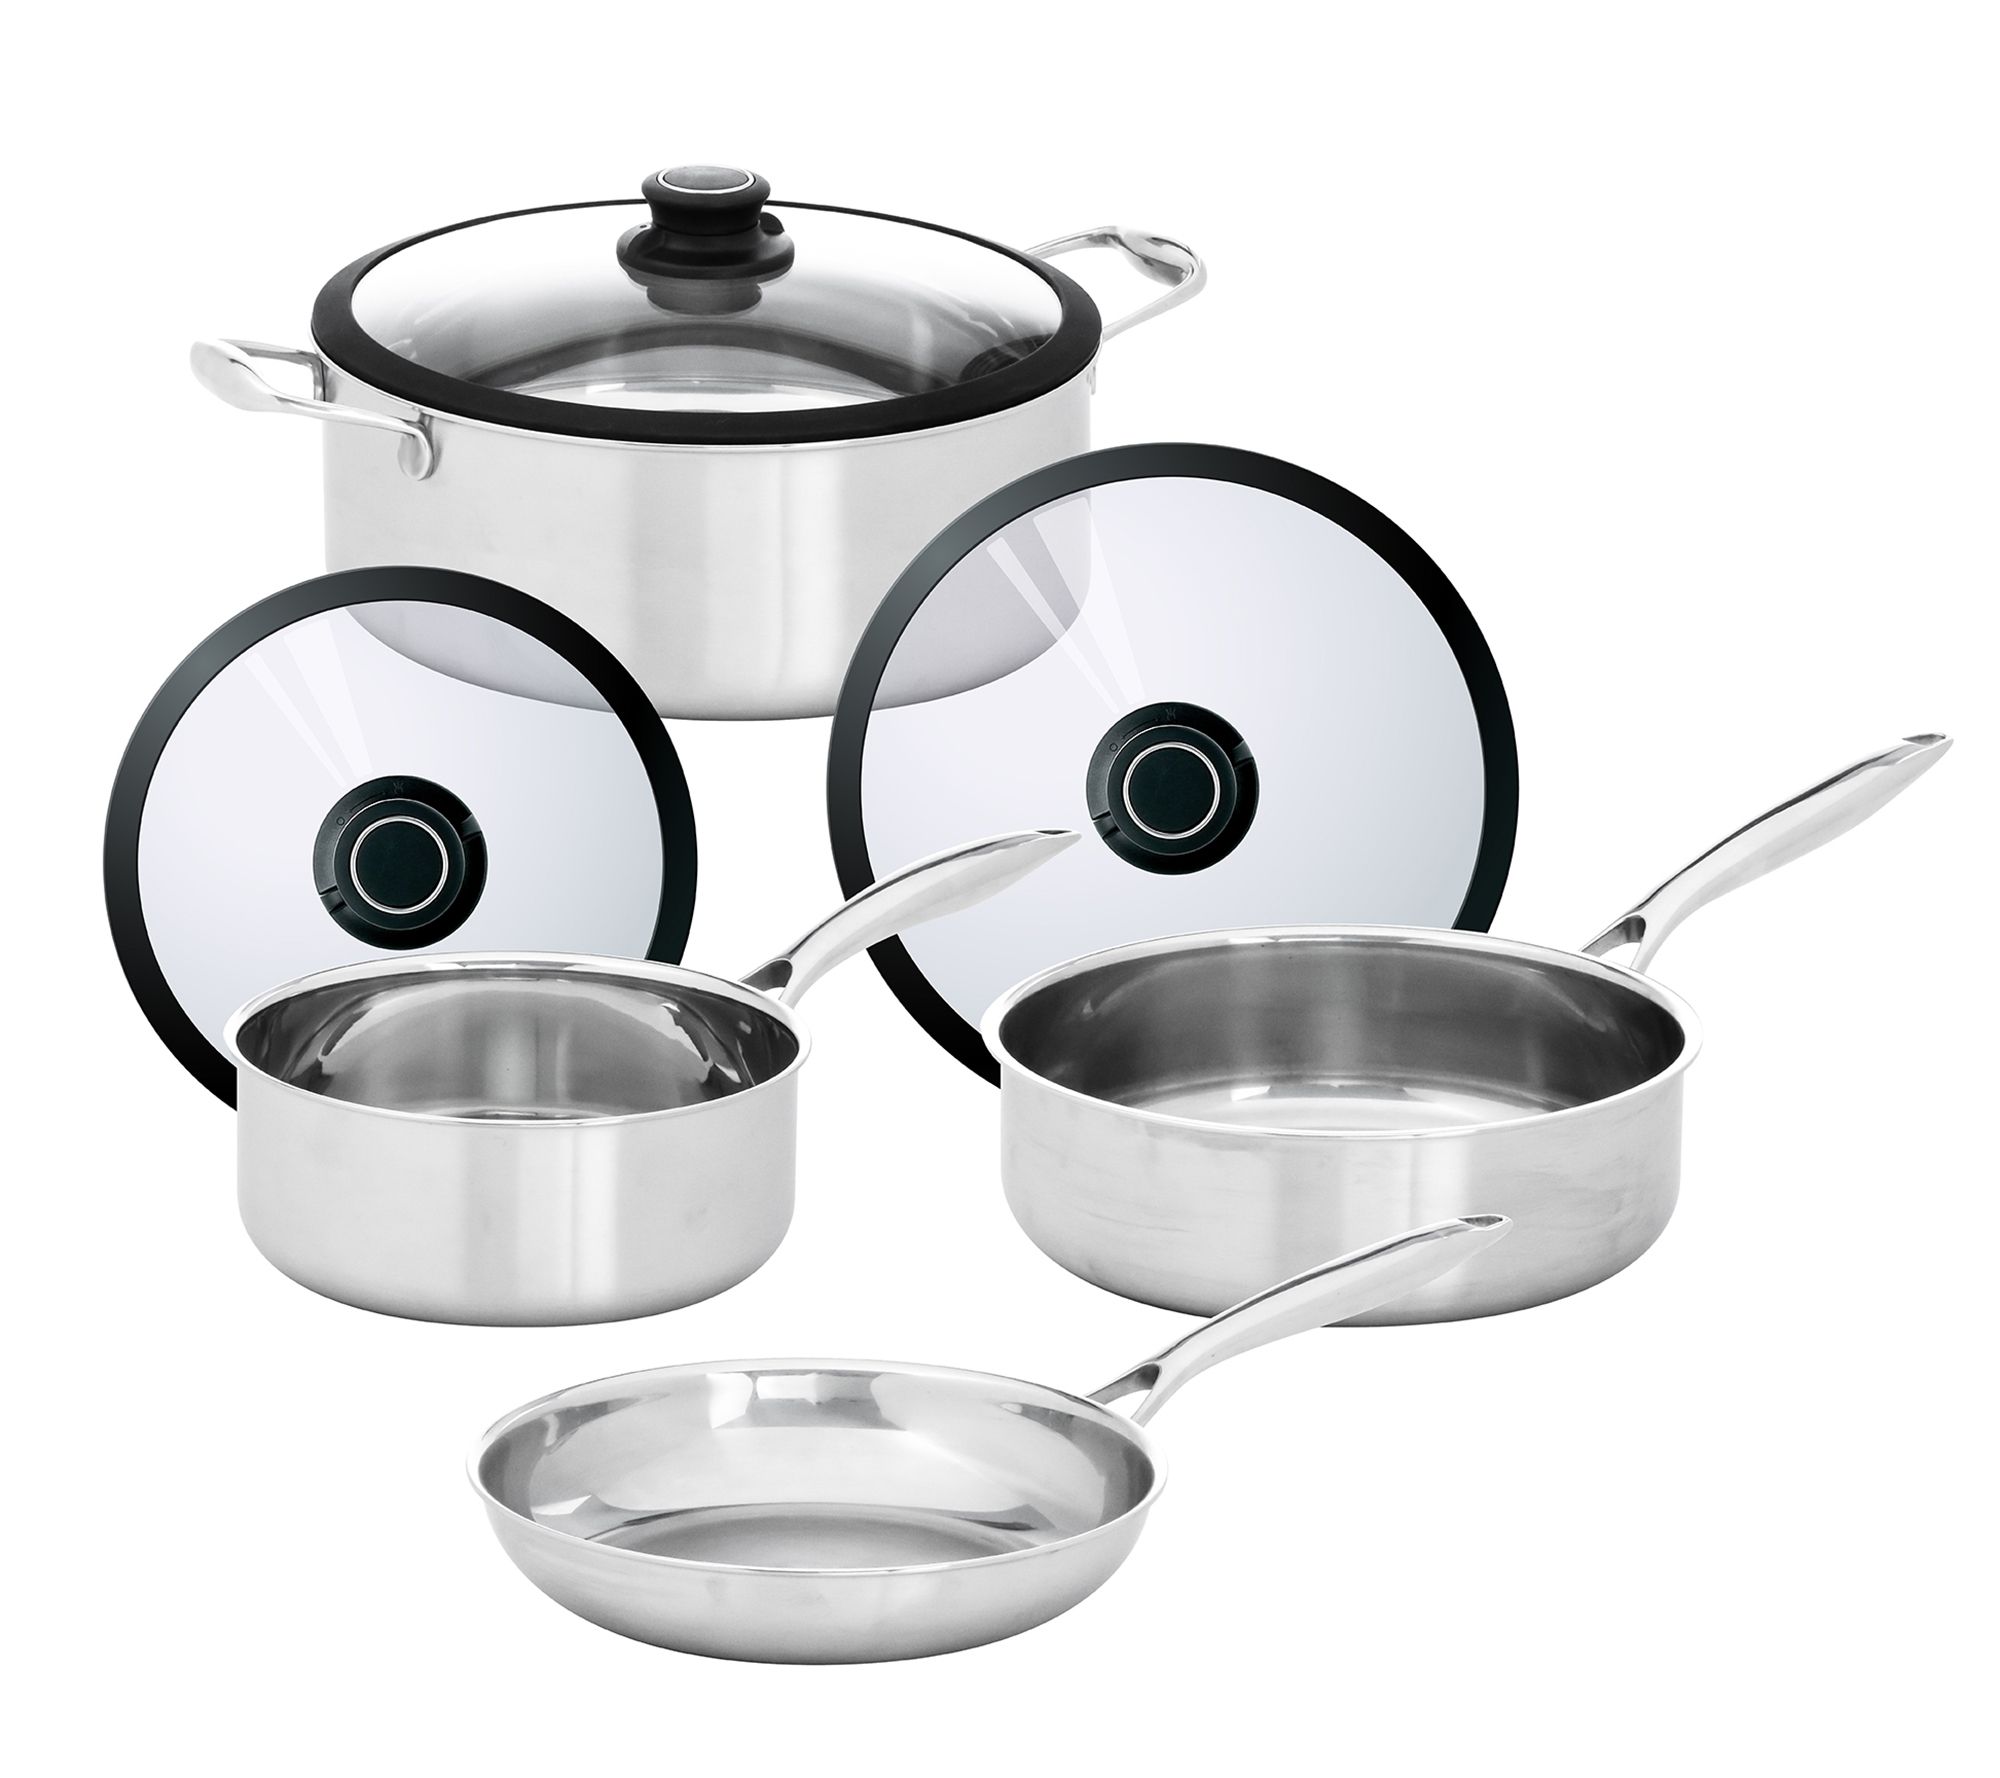 Viking Professional 5-Ply Satin 7-Piece Stainless Steel Cookware Set